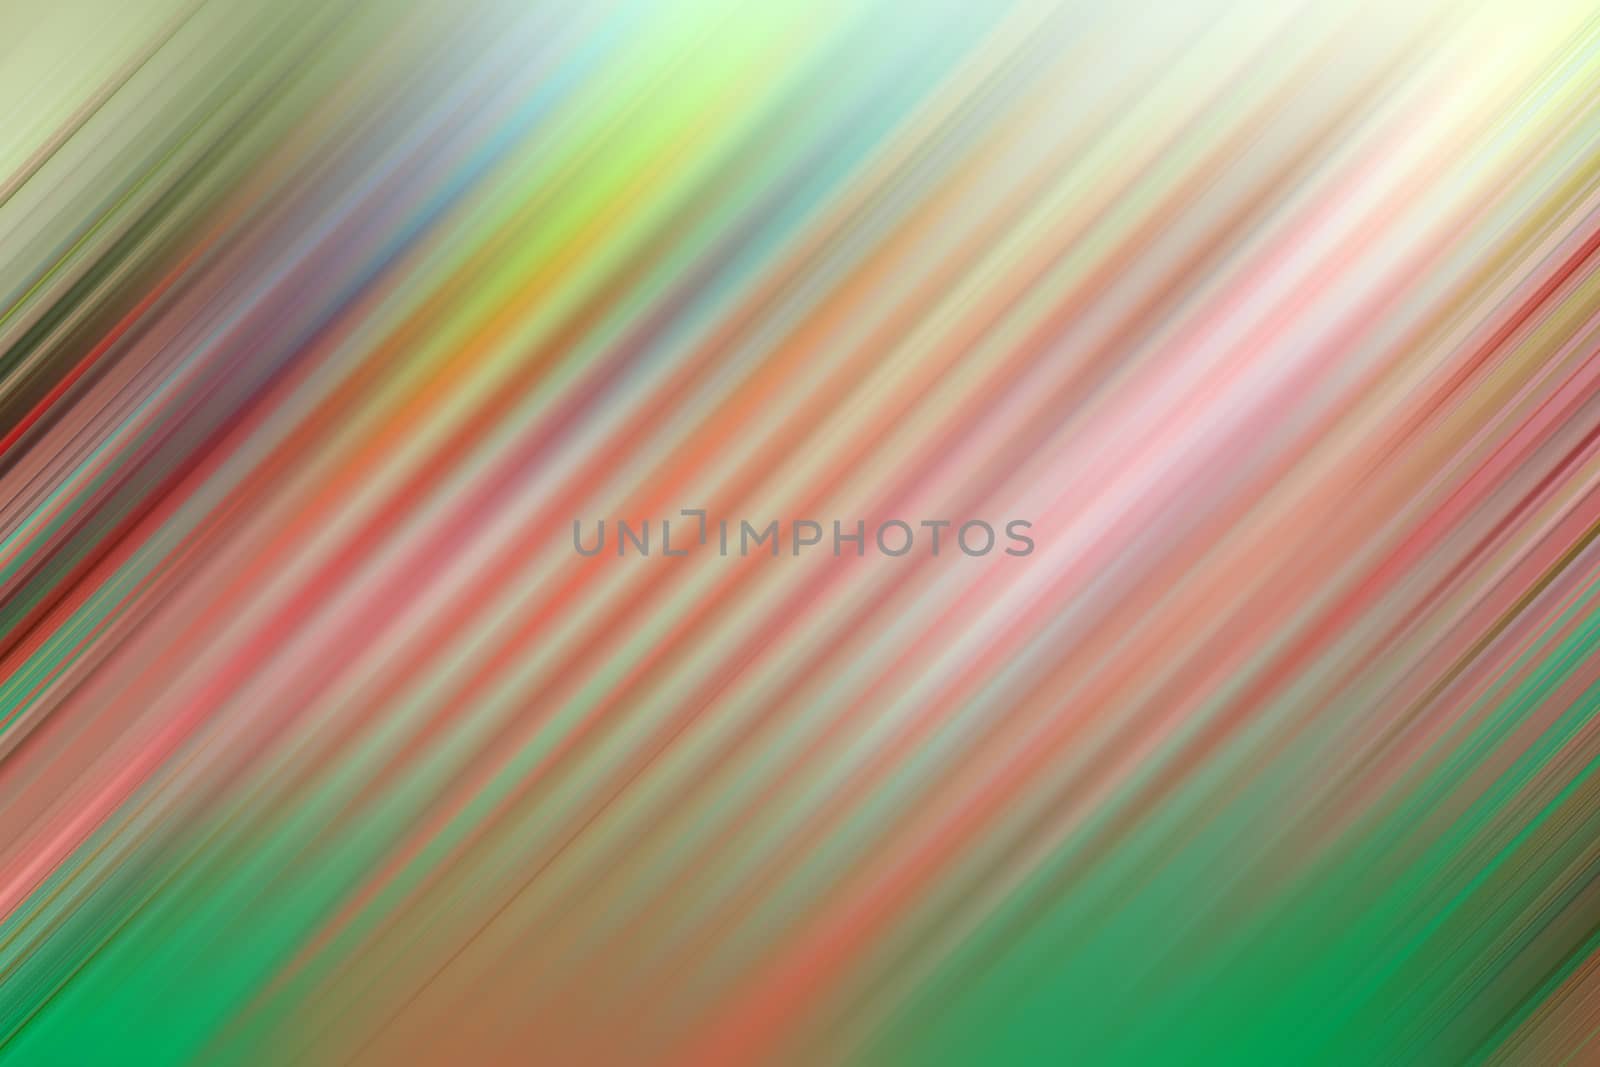 Abstract stylish background for design. Stylish striped background for presentation, wallpaper, banner.